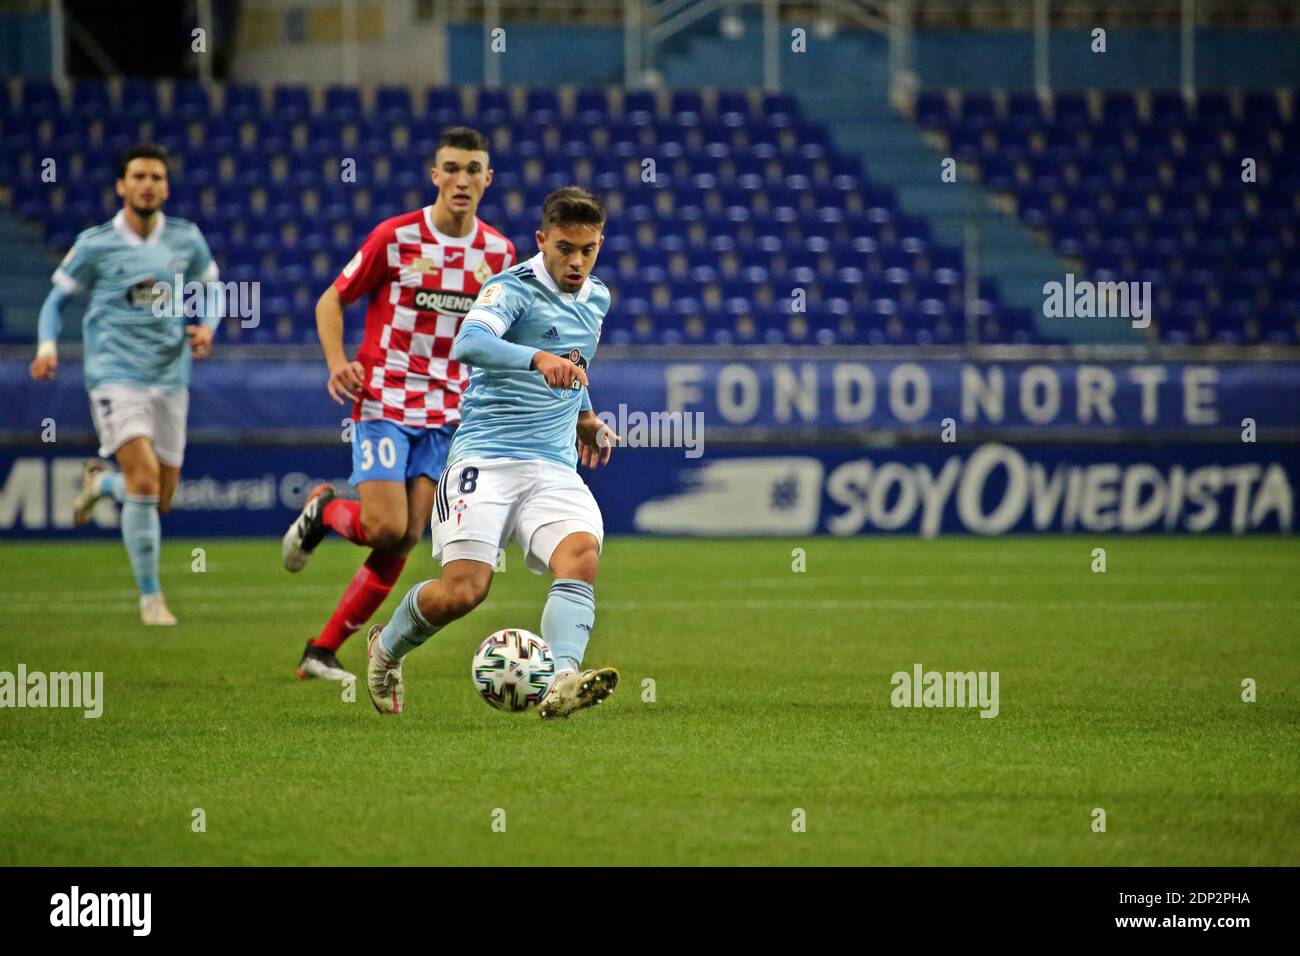 Oviedo, Spain. 17th Dec, 2020. Oviedo, SPAIN: RC Celta de Vigo player Fran Beltrán (8) passes the ball during the First Round of the SM El Rey 2020-21 Cup between UD Llanera and RC Celta de Vigo with victory for the visitors by 0-5 at the Estadio Nuevo Carlos Tartiere in Oviedo, Spain on December 17, 2020. (Photo by Alberto Brevers/Pacific Press/Sipa USA) Credit: Sipa USA/Alamy Live News Stock Photo